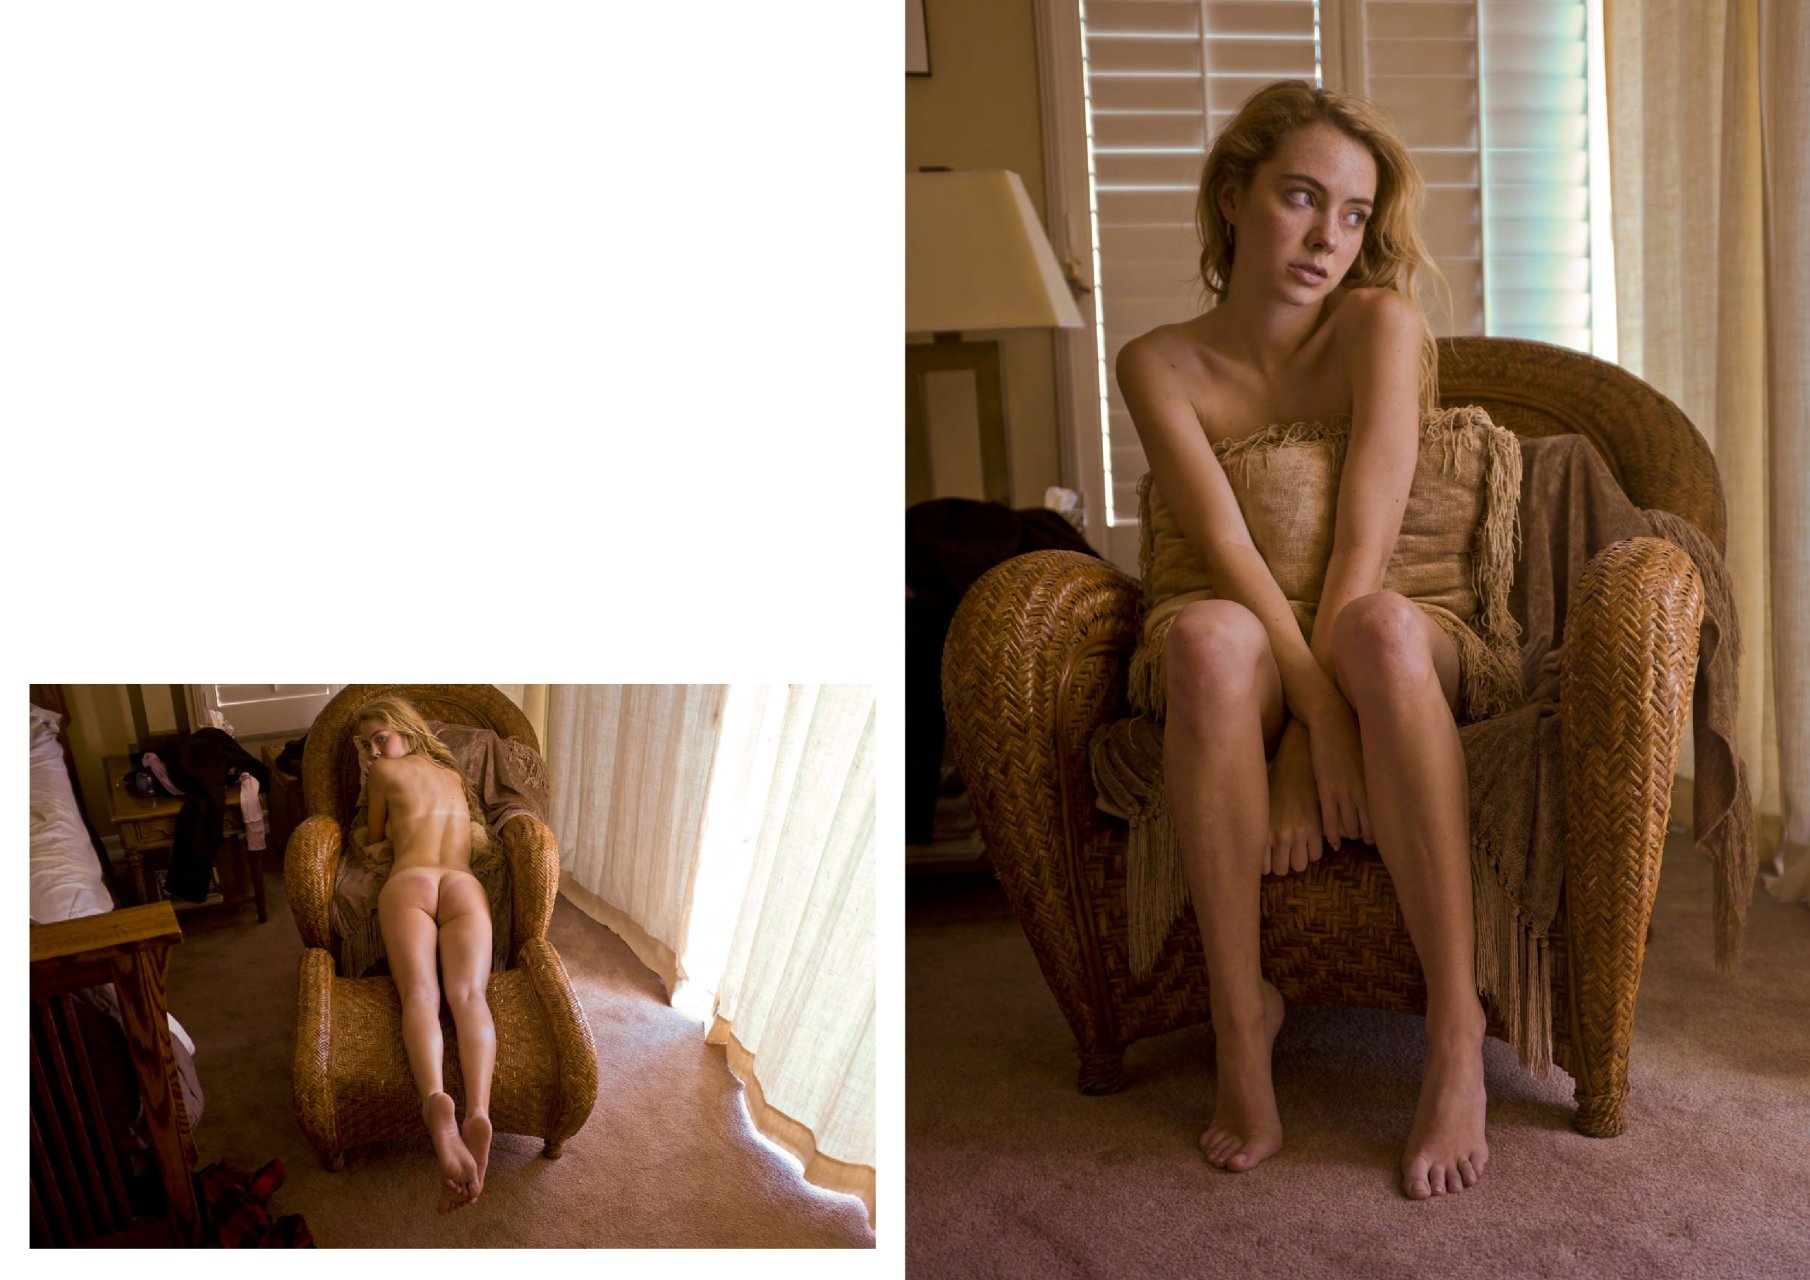 New nude, topless and sexy photos of Haley Nicole Permenter by Matthew Come...